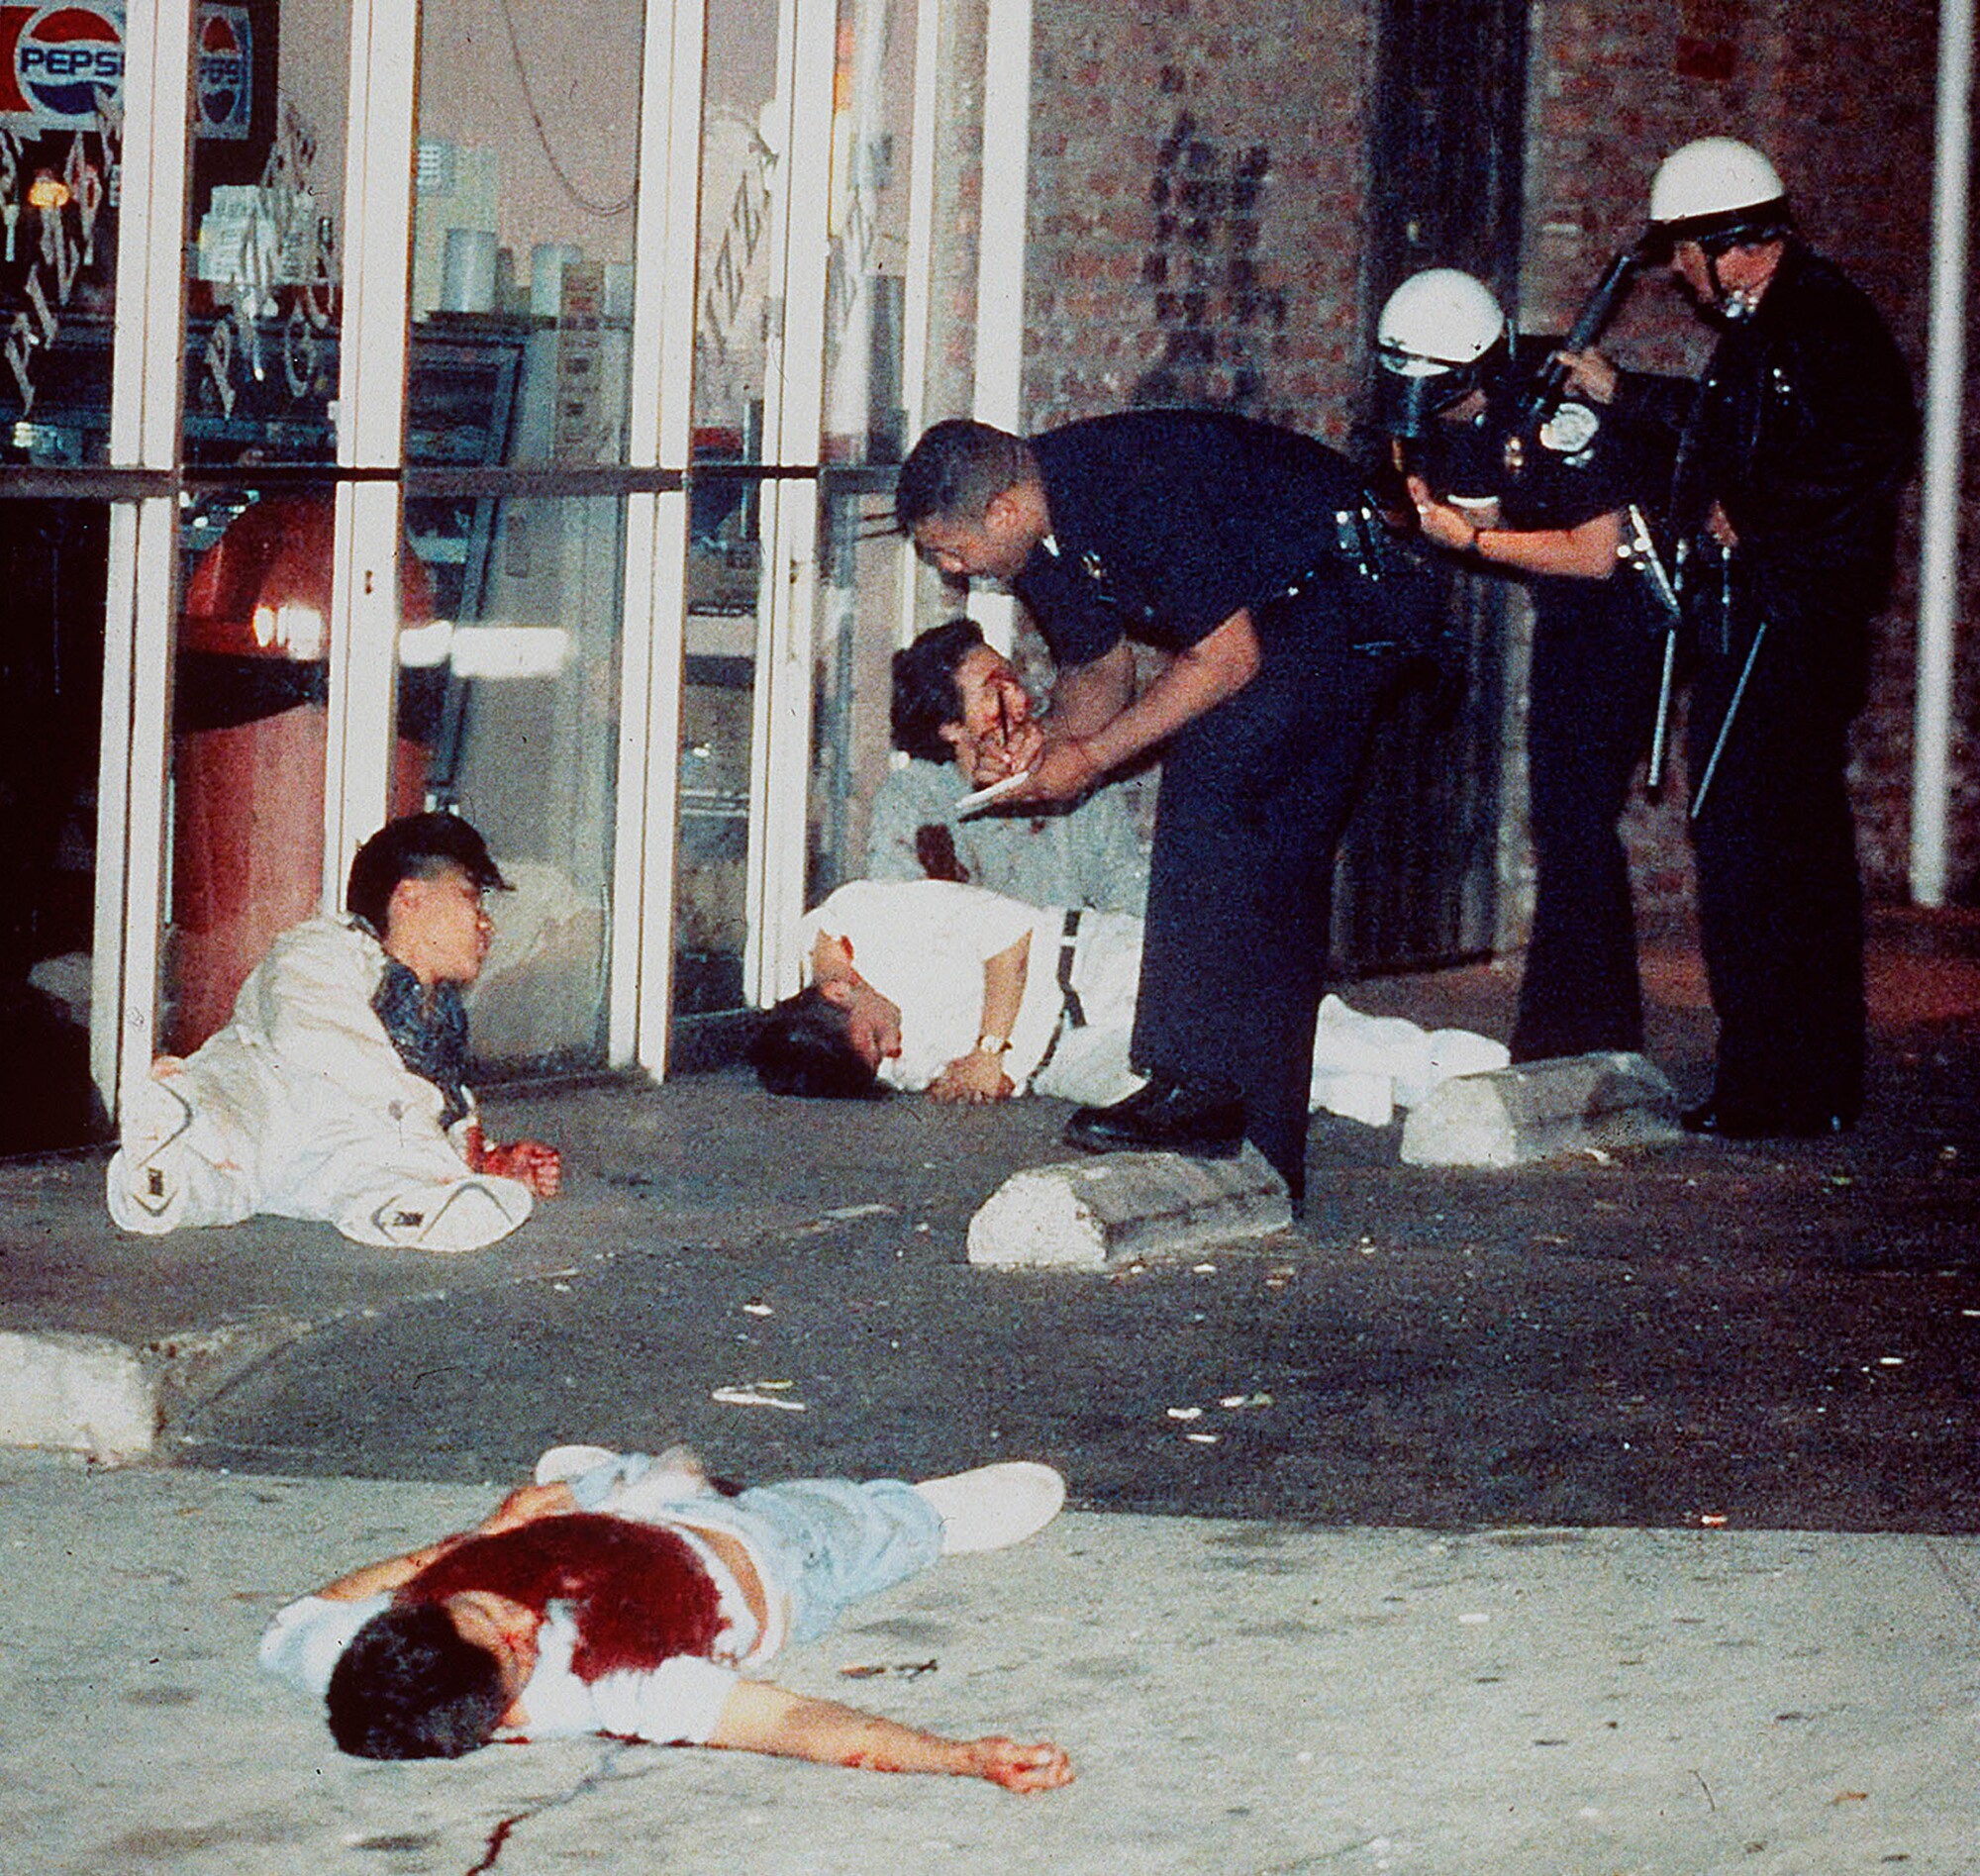 Edward Song Lee, foreground, was shot to death and three other Koreans were injured in Koreatown on April 30, 1992.